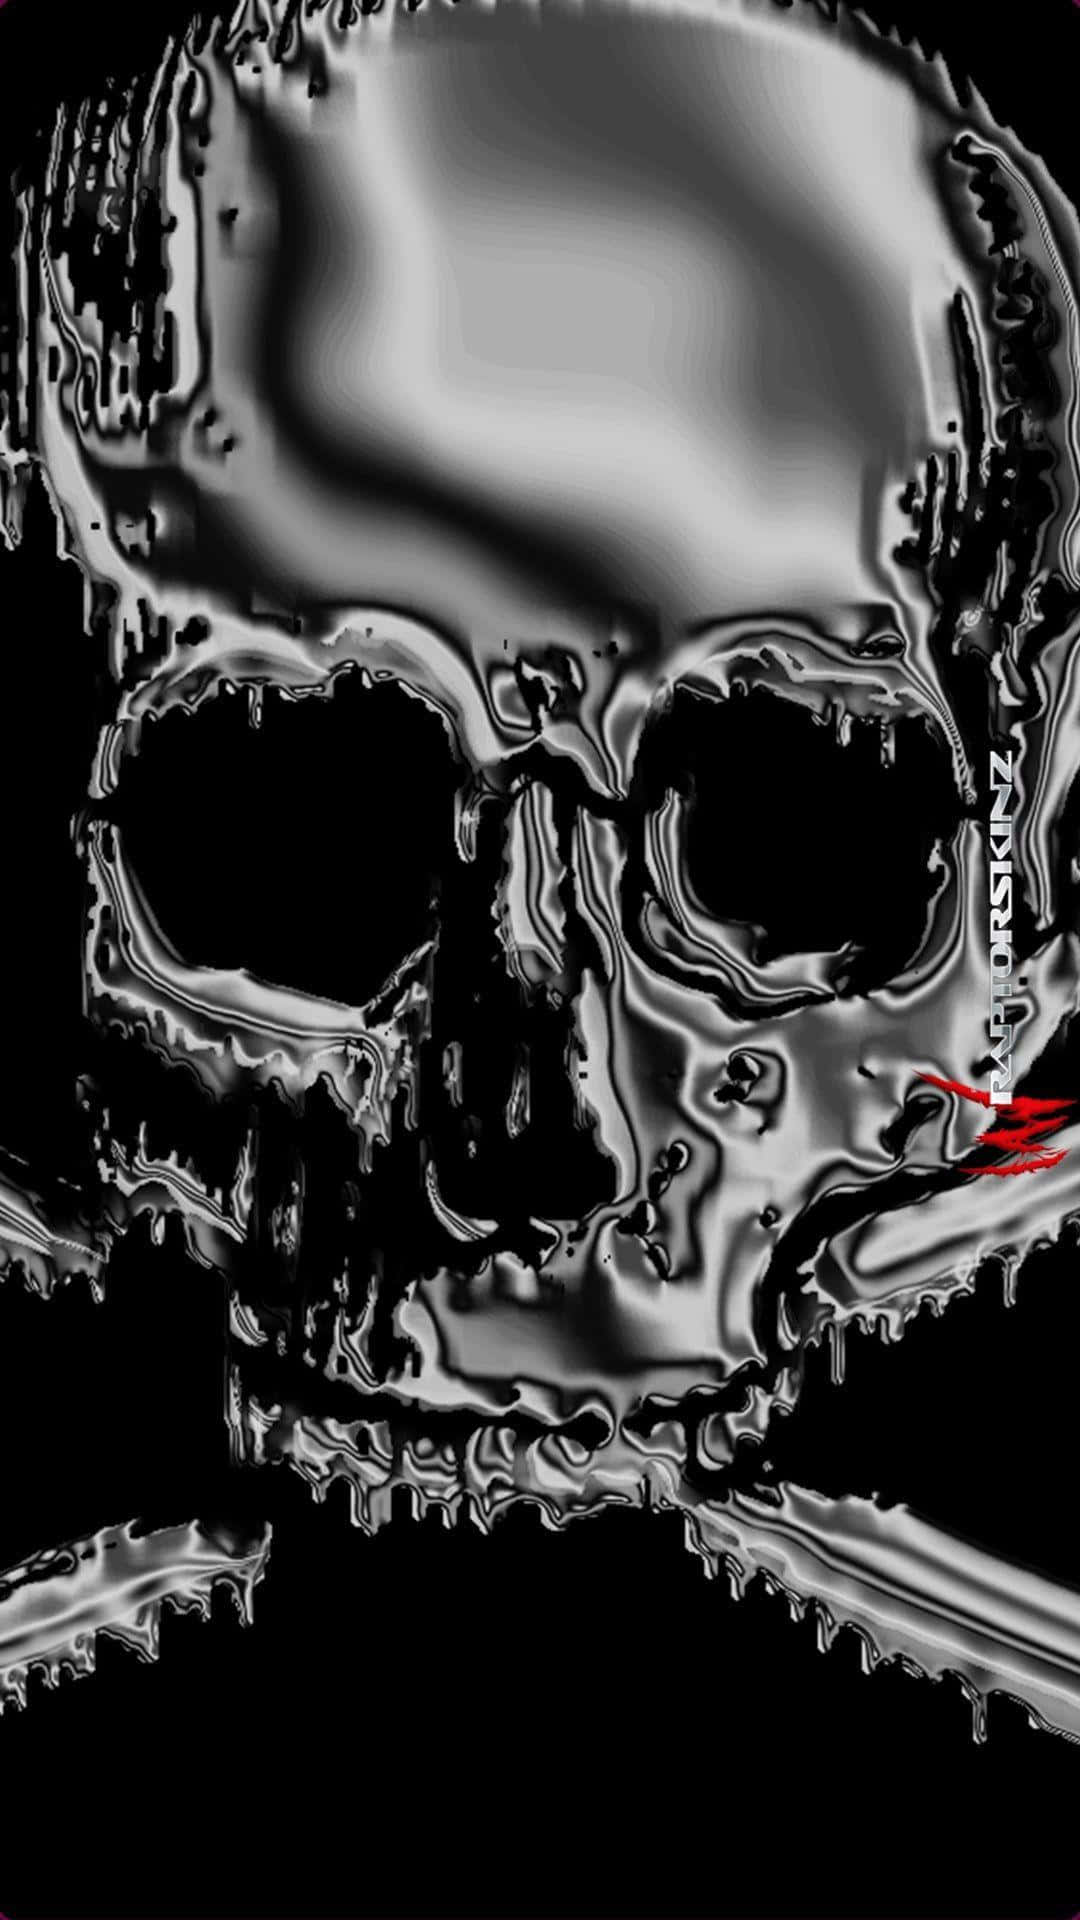 The classic symbol of death and danger - a skull and crossbones. Wallpaper